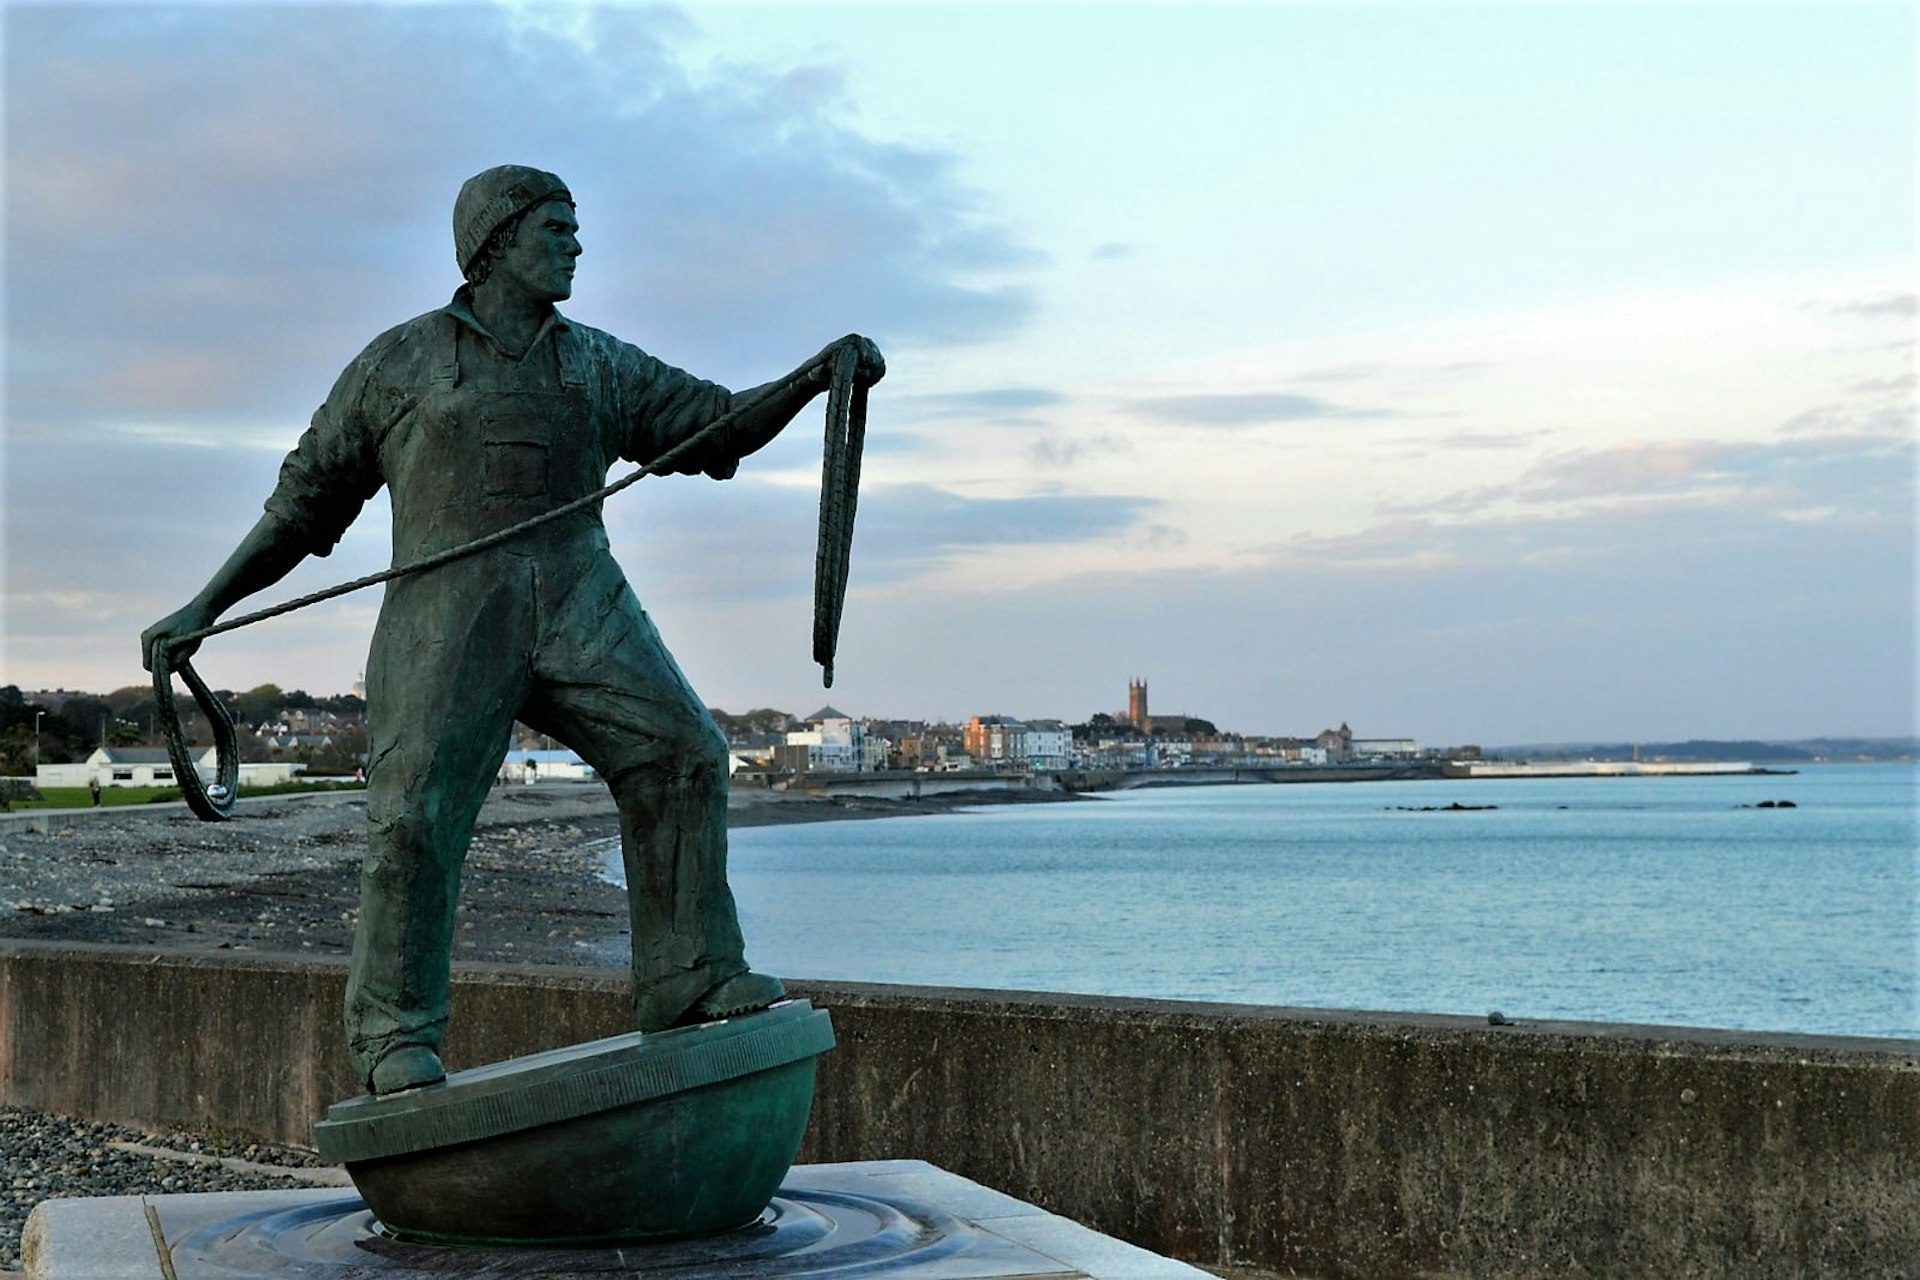 Penzance's maritime traditions means fresh fish and seafood figure highly on local menus © Emma Sparks / Lonely Planet